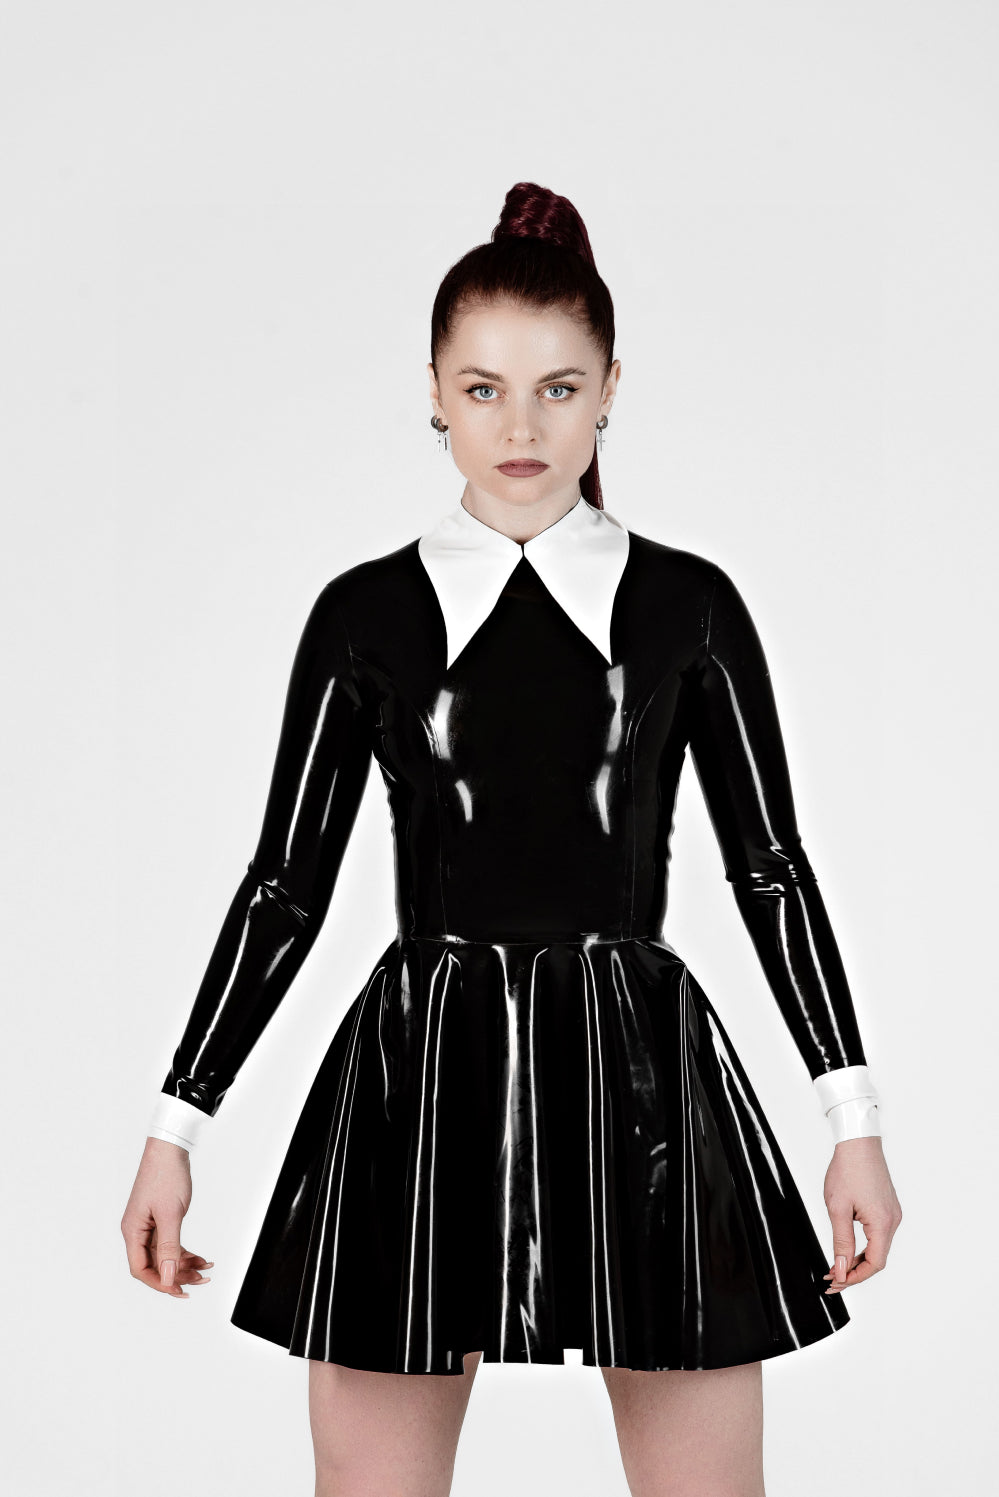 Latex Skater Dress for Women, Wednesday outfit